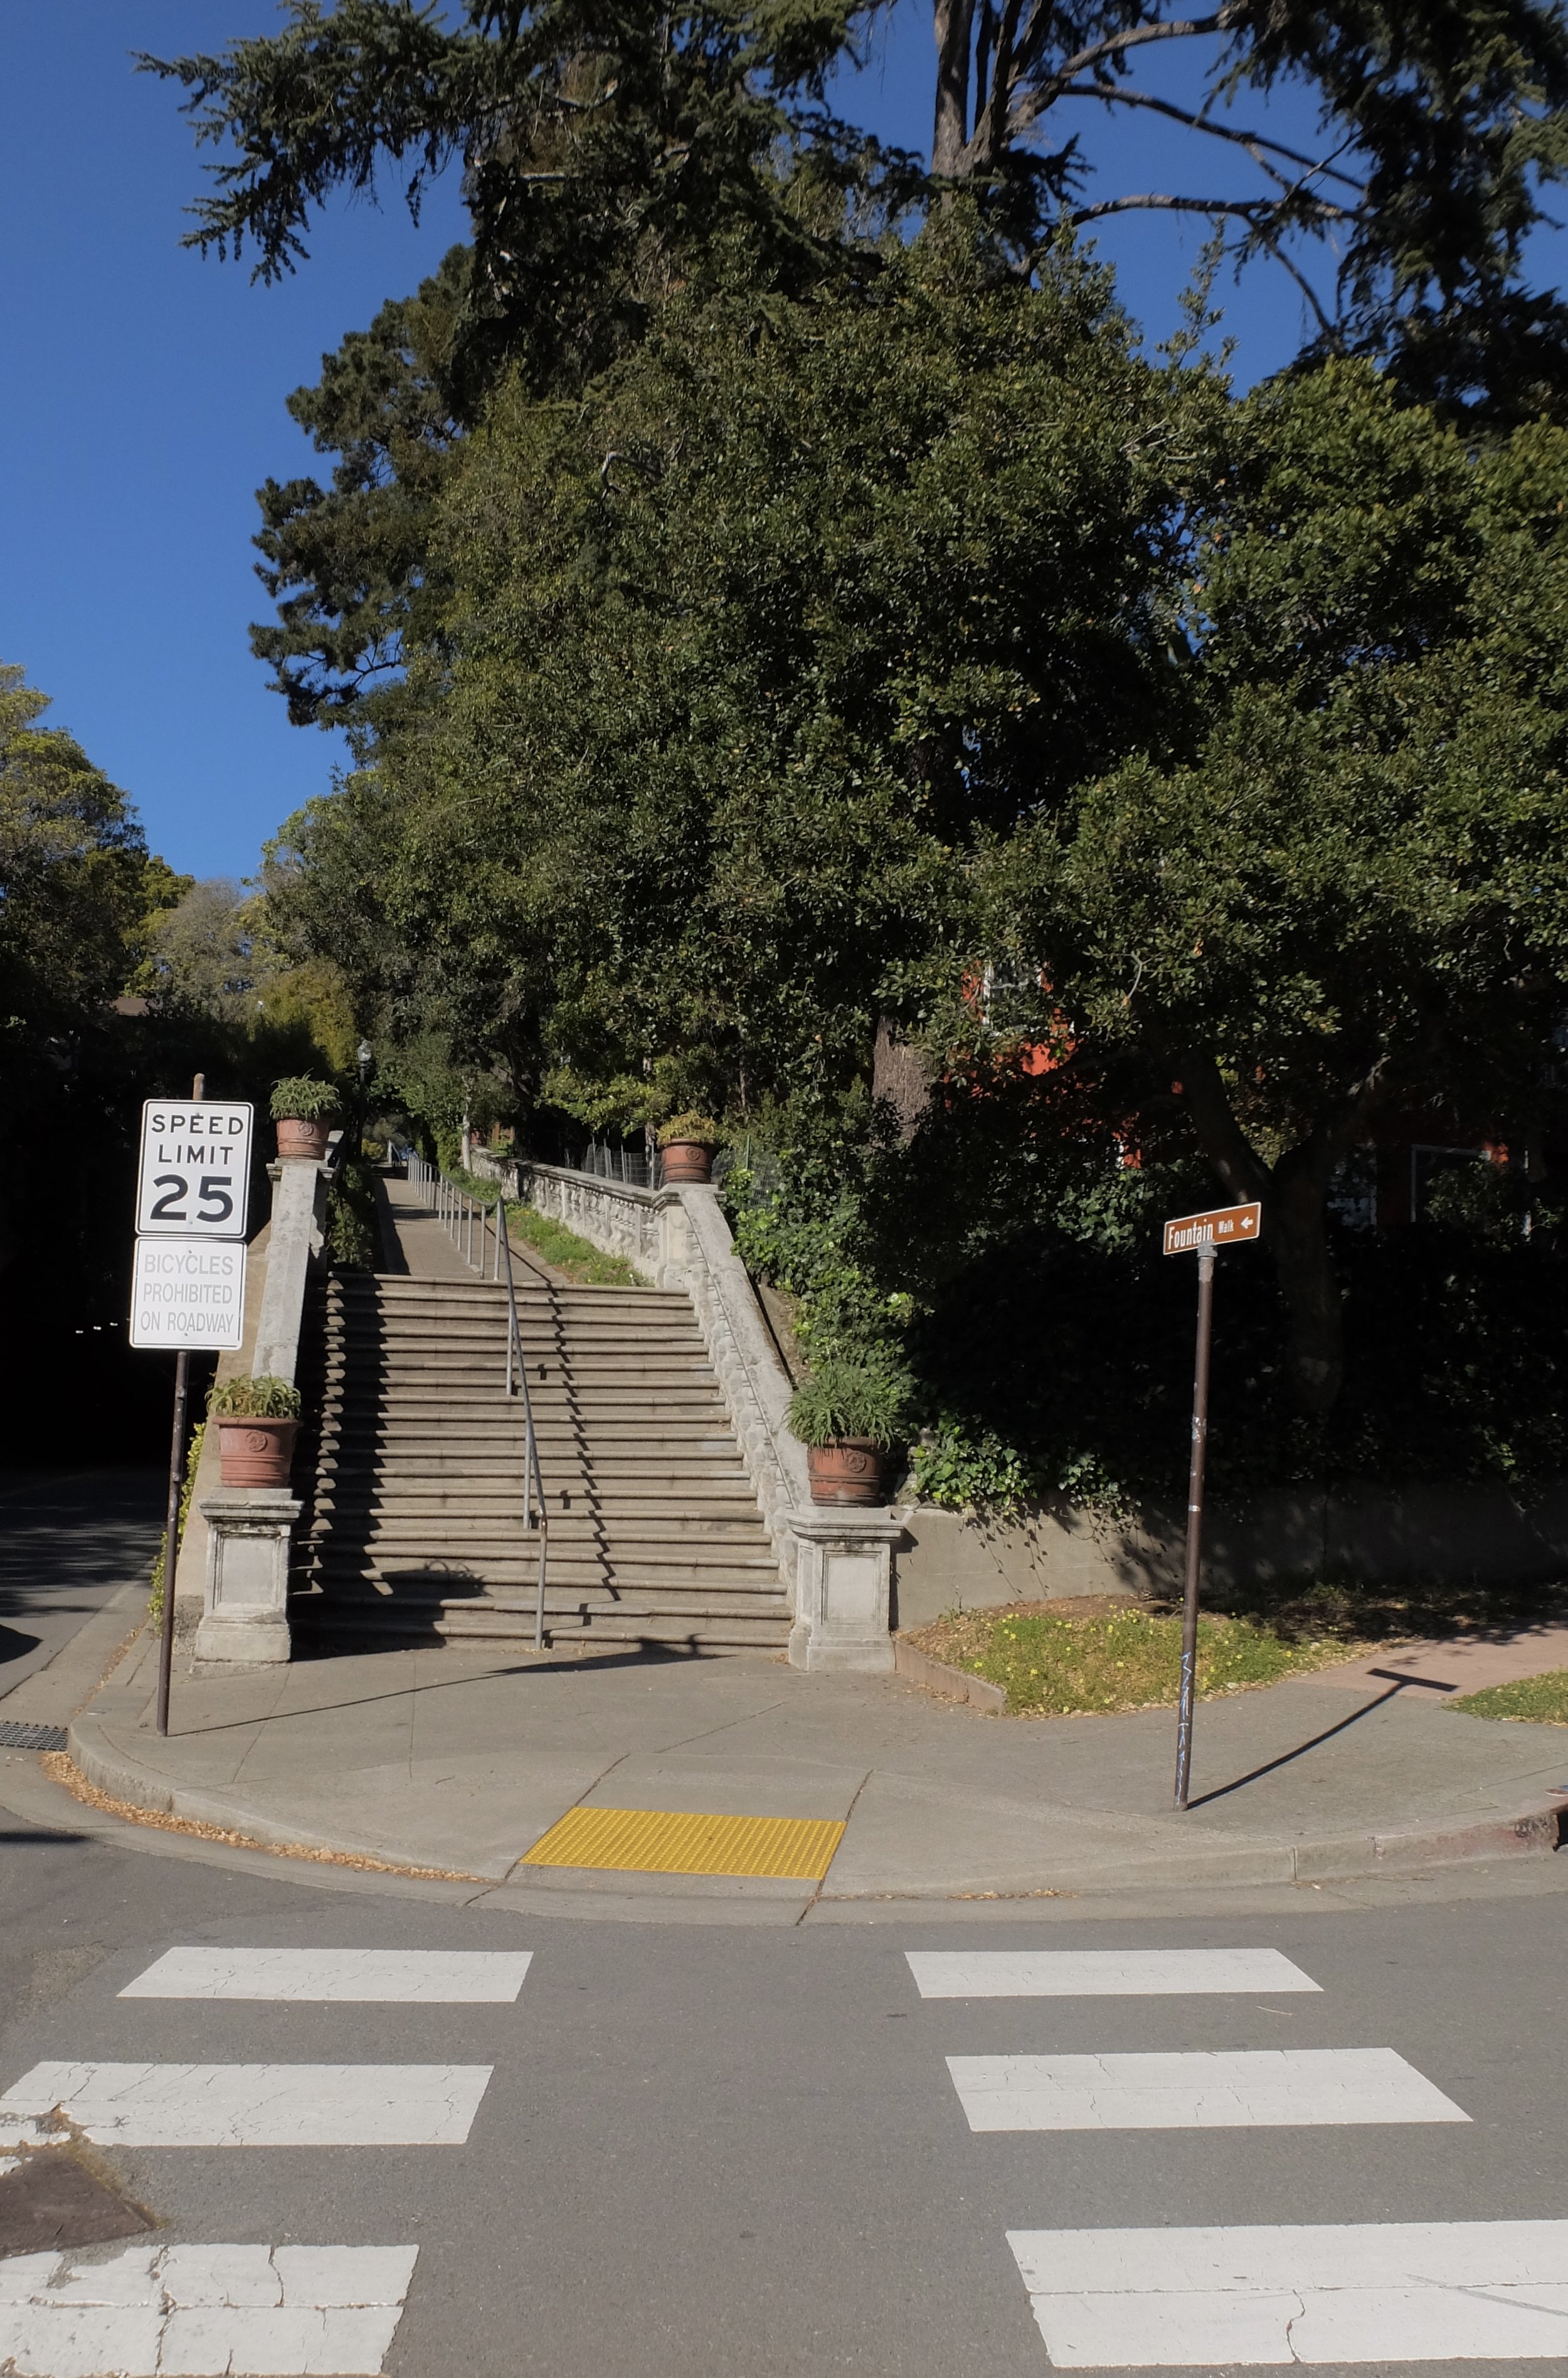  I had seen these steps many times as we drove &amp; entered the Northbrae (Solano) Tunnel. I parked nearby &amp; climbed up hoping that I'd somehow end up on Solano Ave. that is at the other end of the tunnel. 